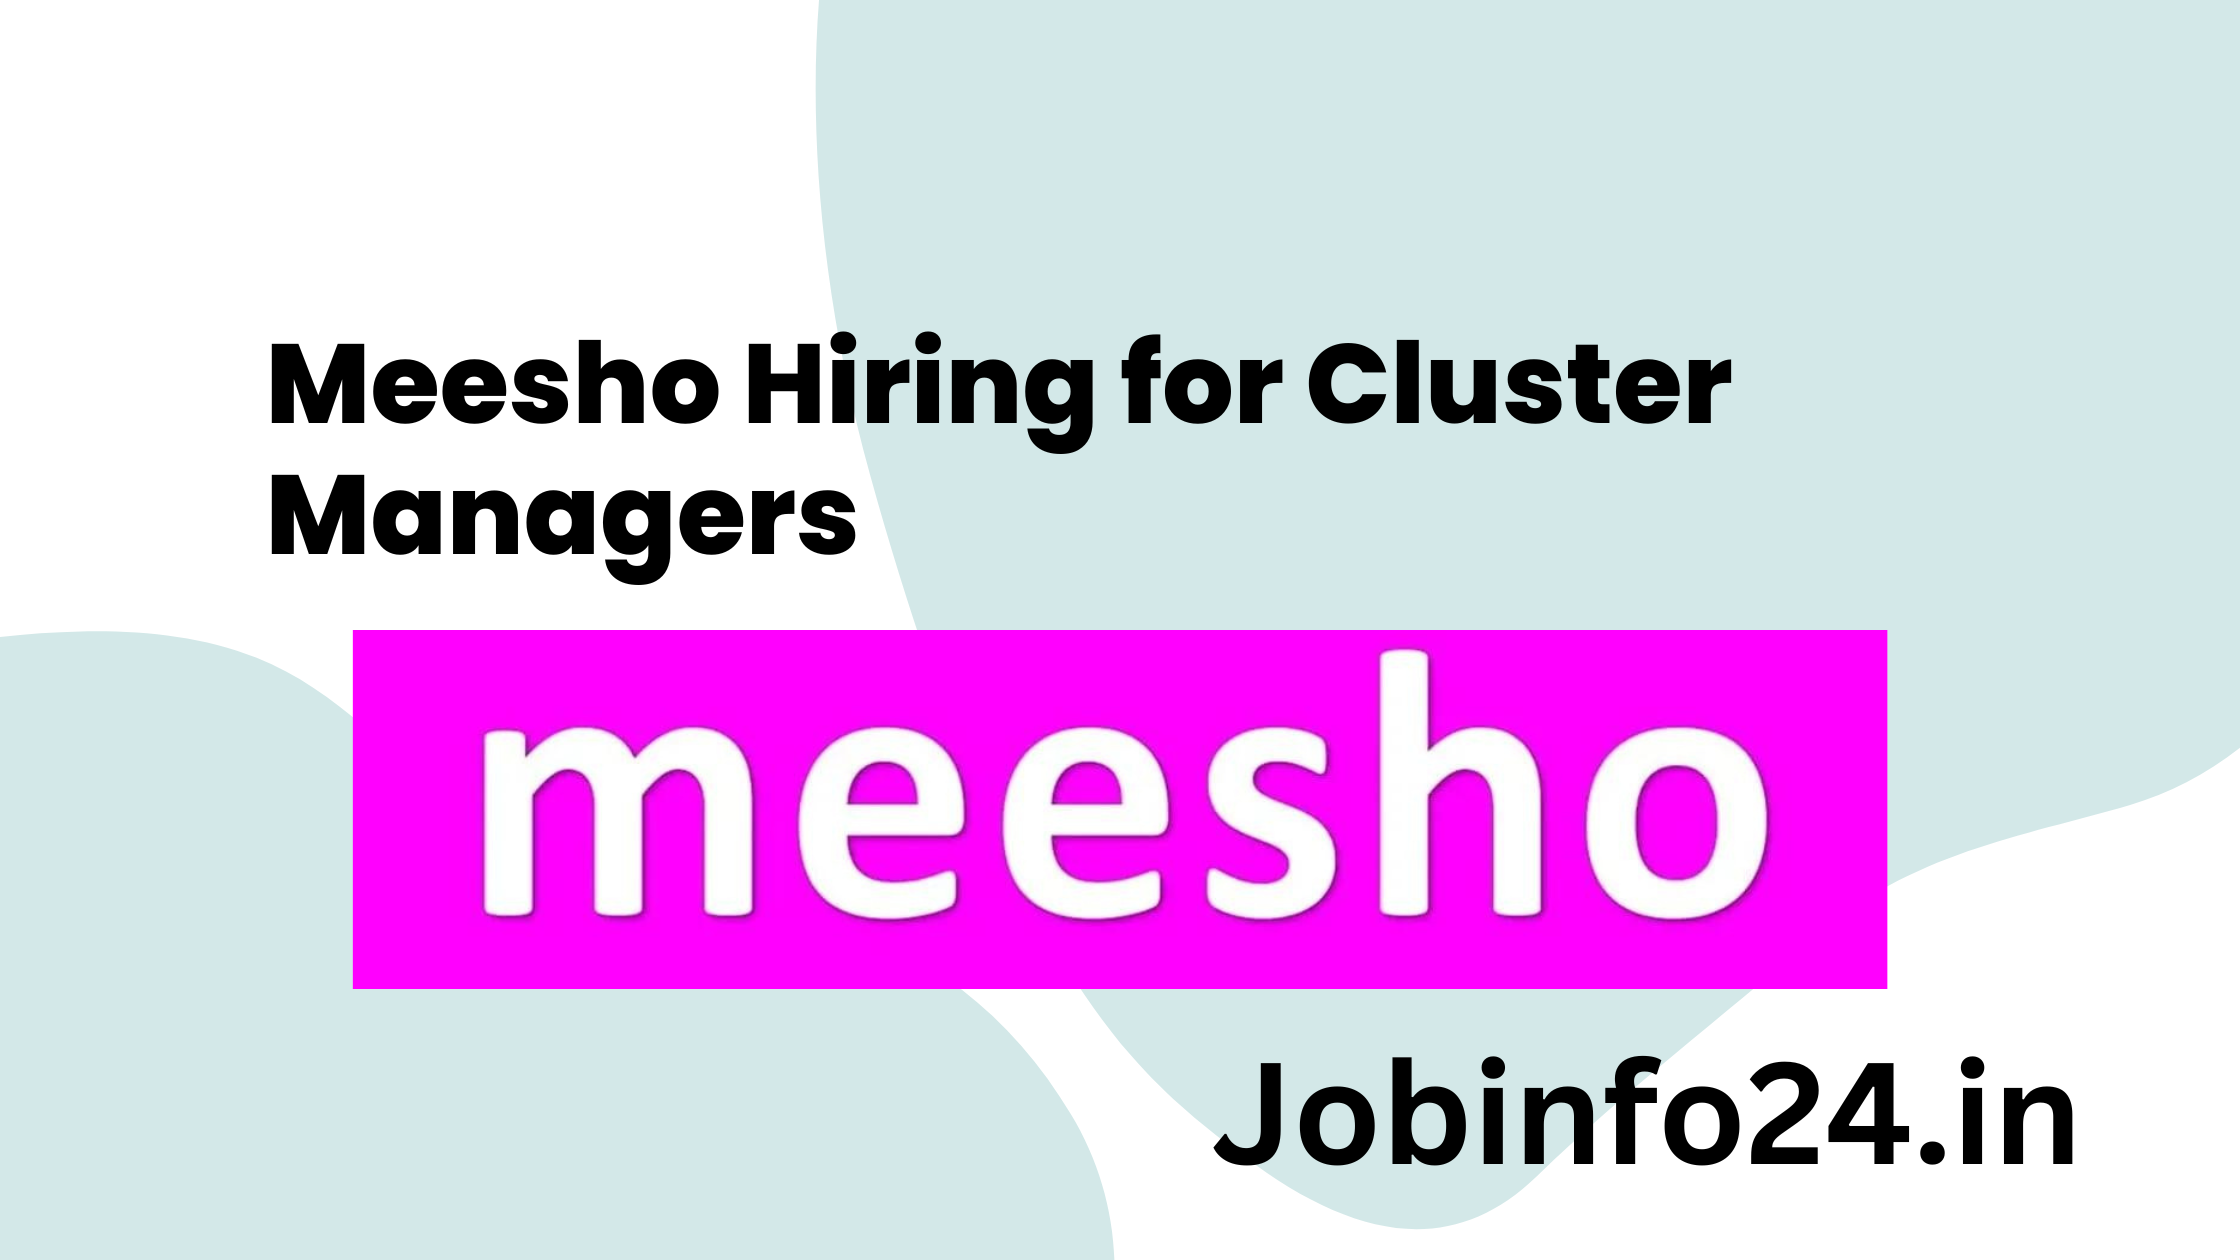 Meesho Hiring for Cluster Managers